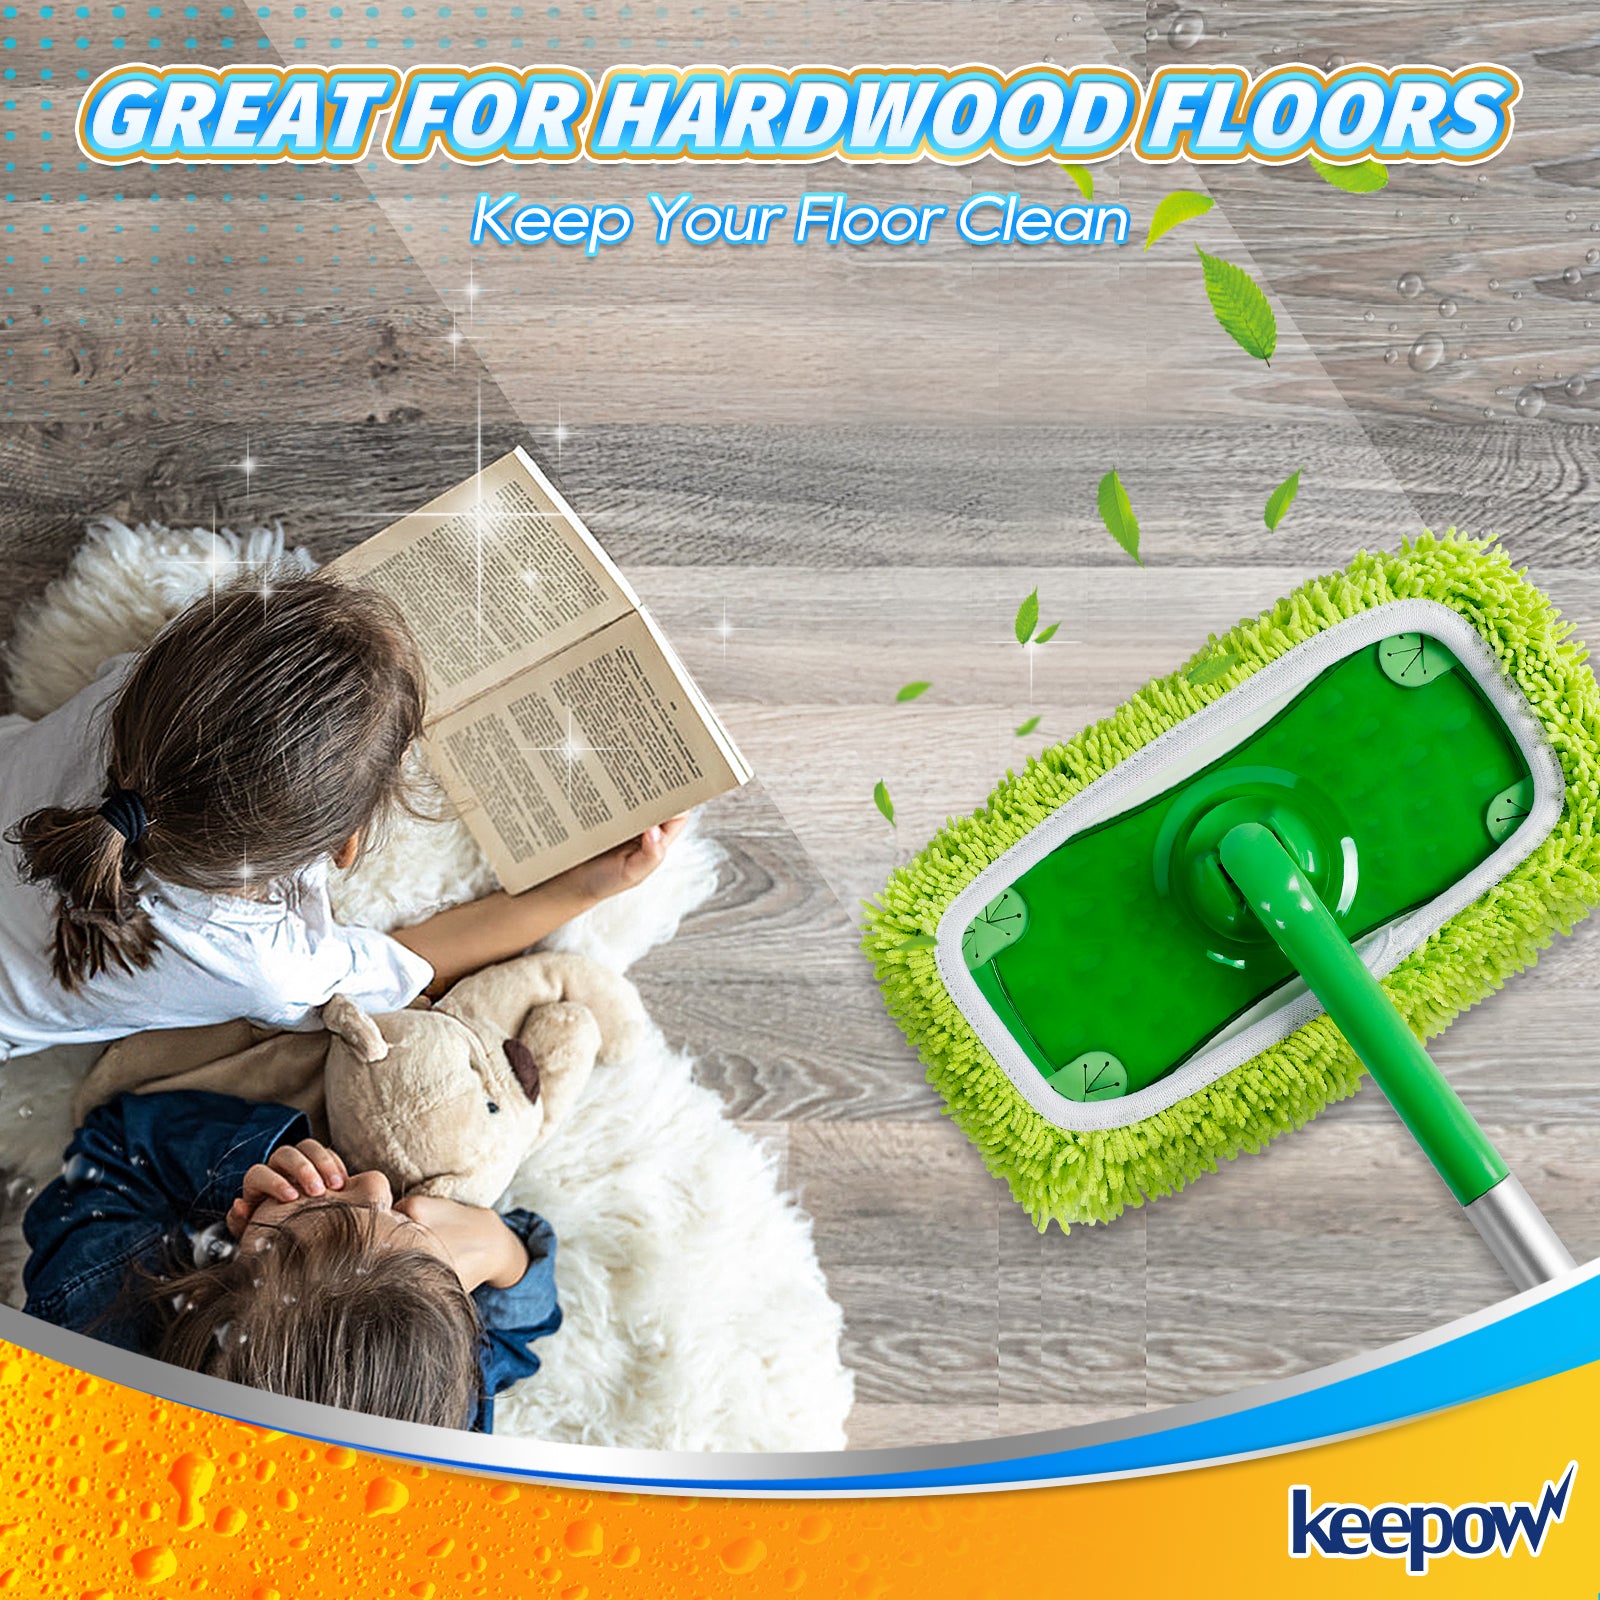 Keepow green Dry Sweeping Cloths for swiffer